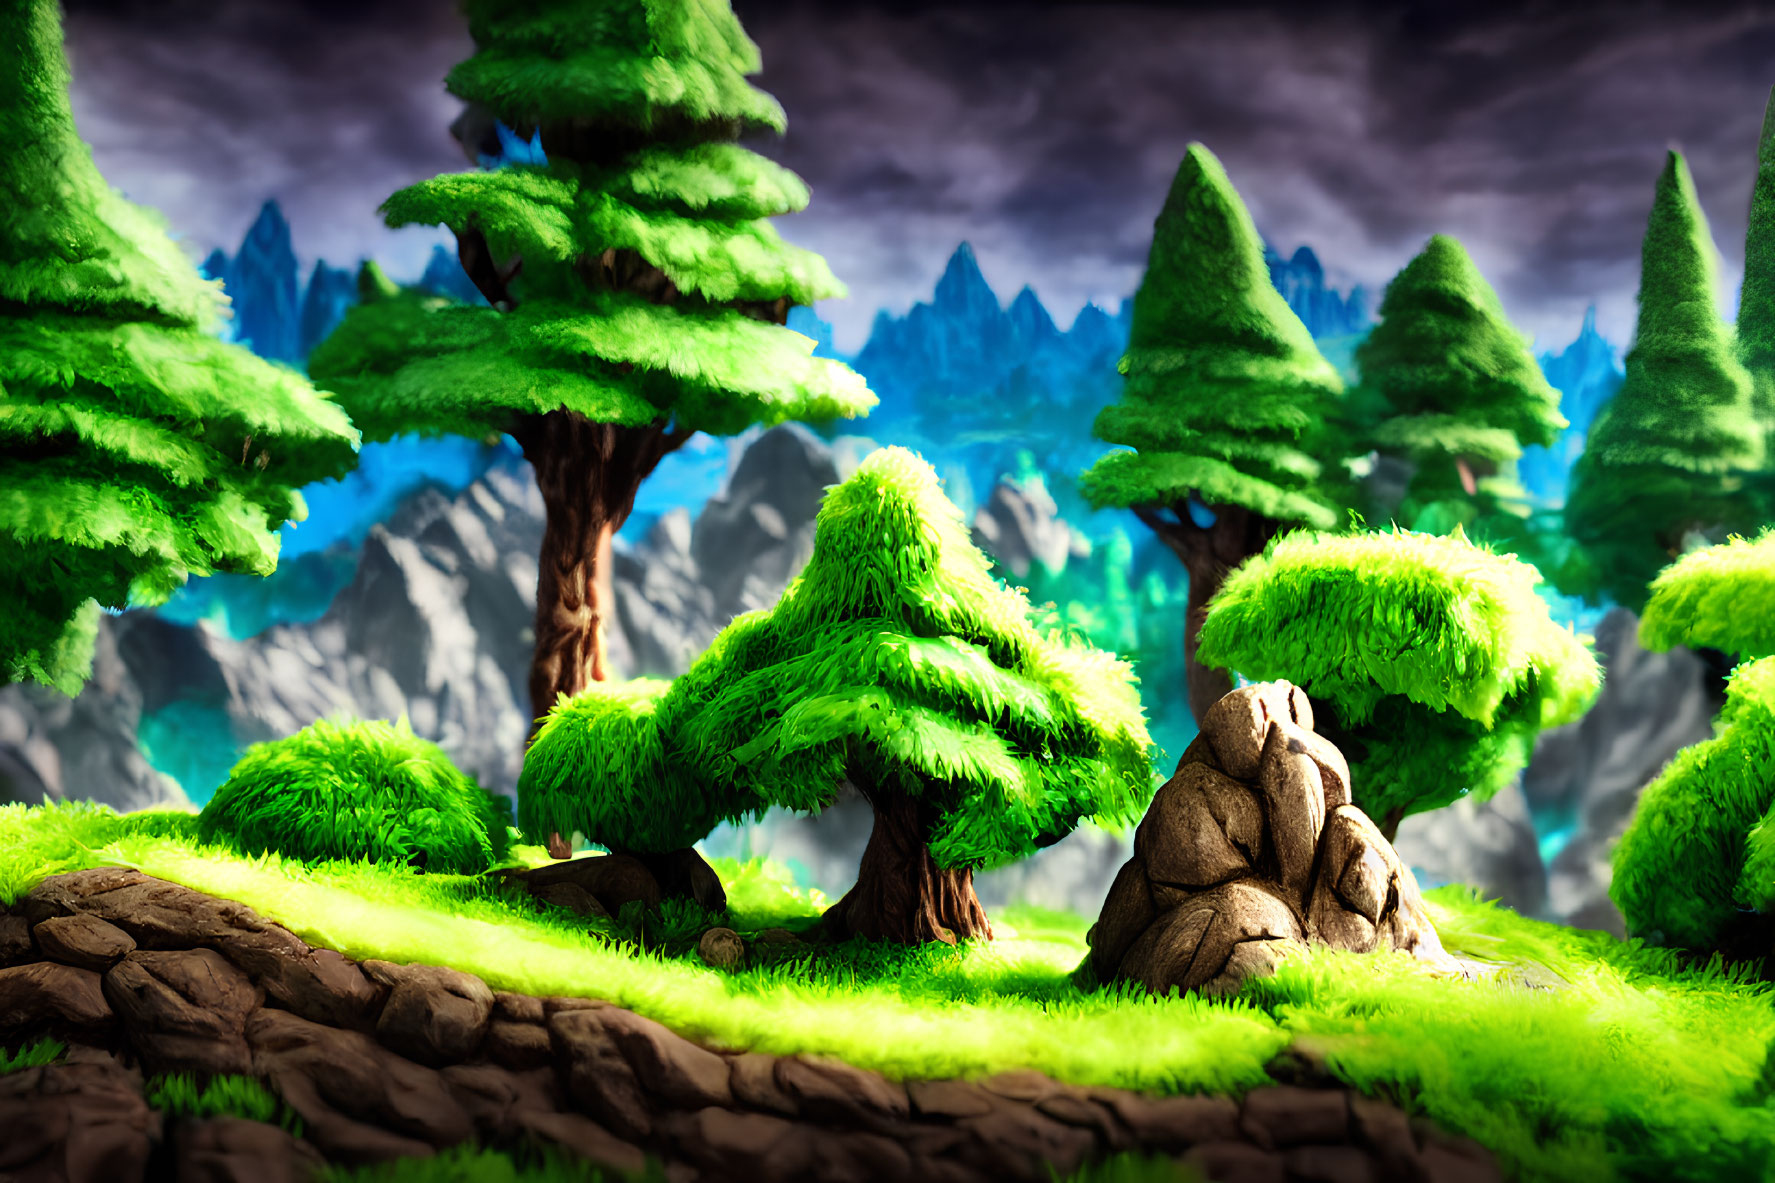 Stylized forest scene with lush green foliage, grassy terrain, rocky mountains, and dynamic cloudy